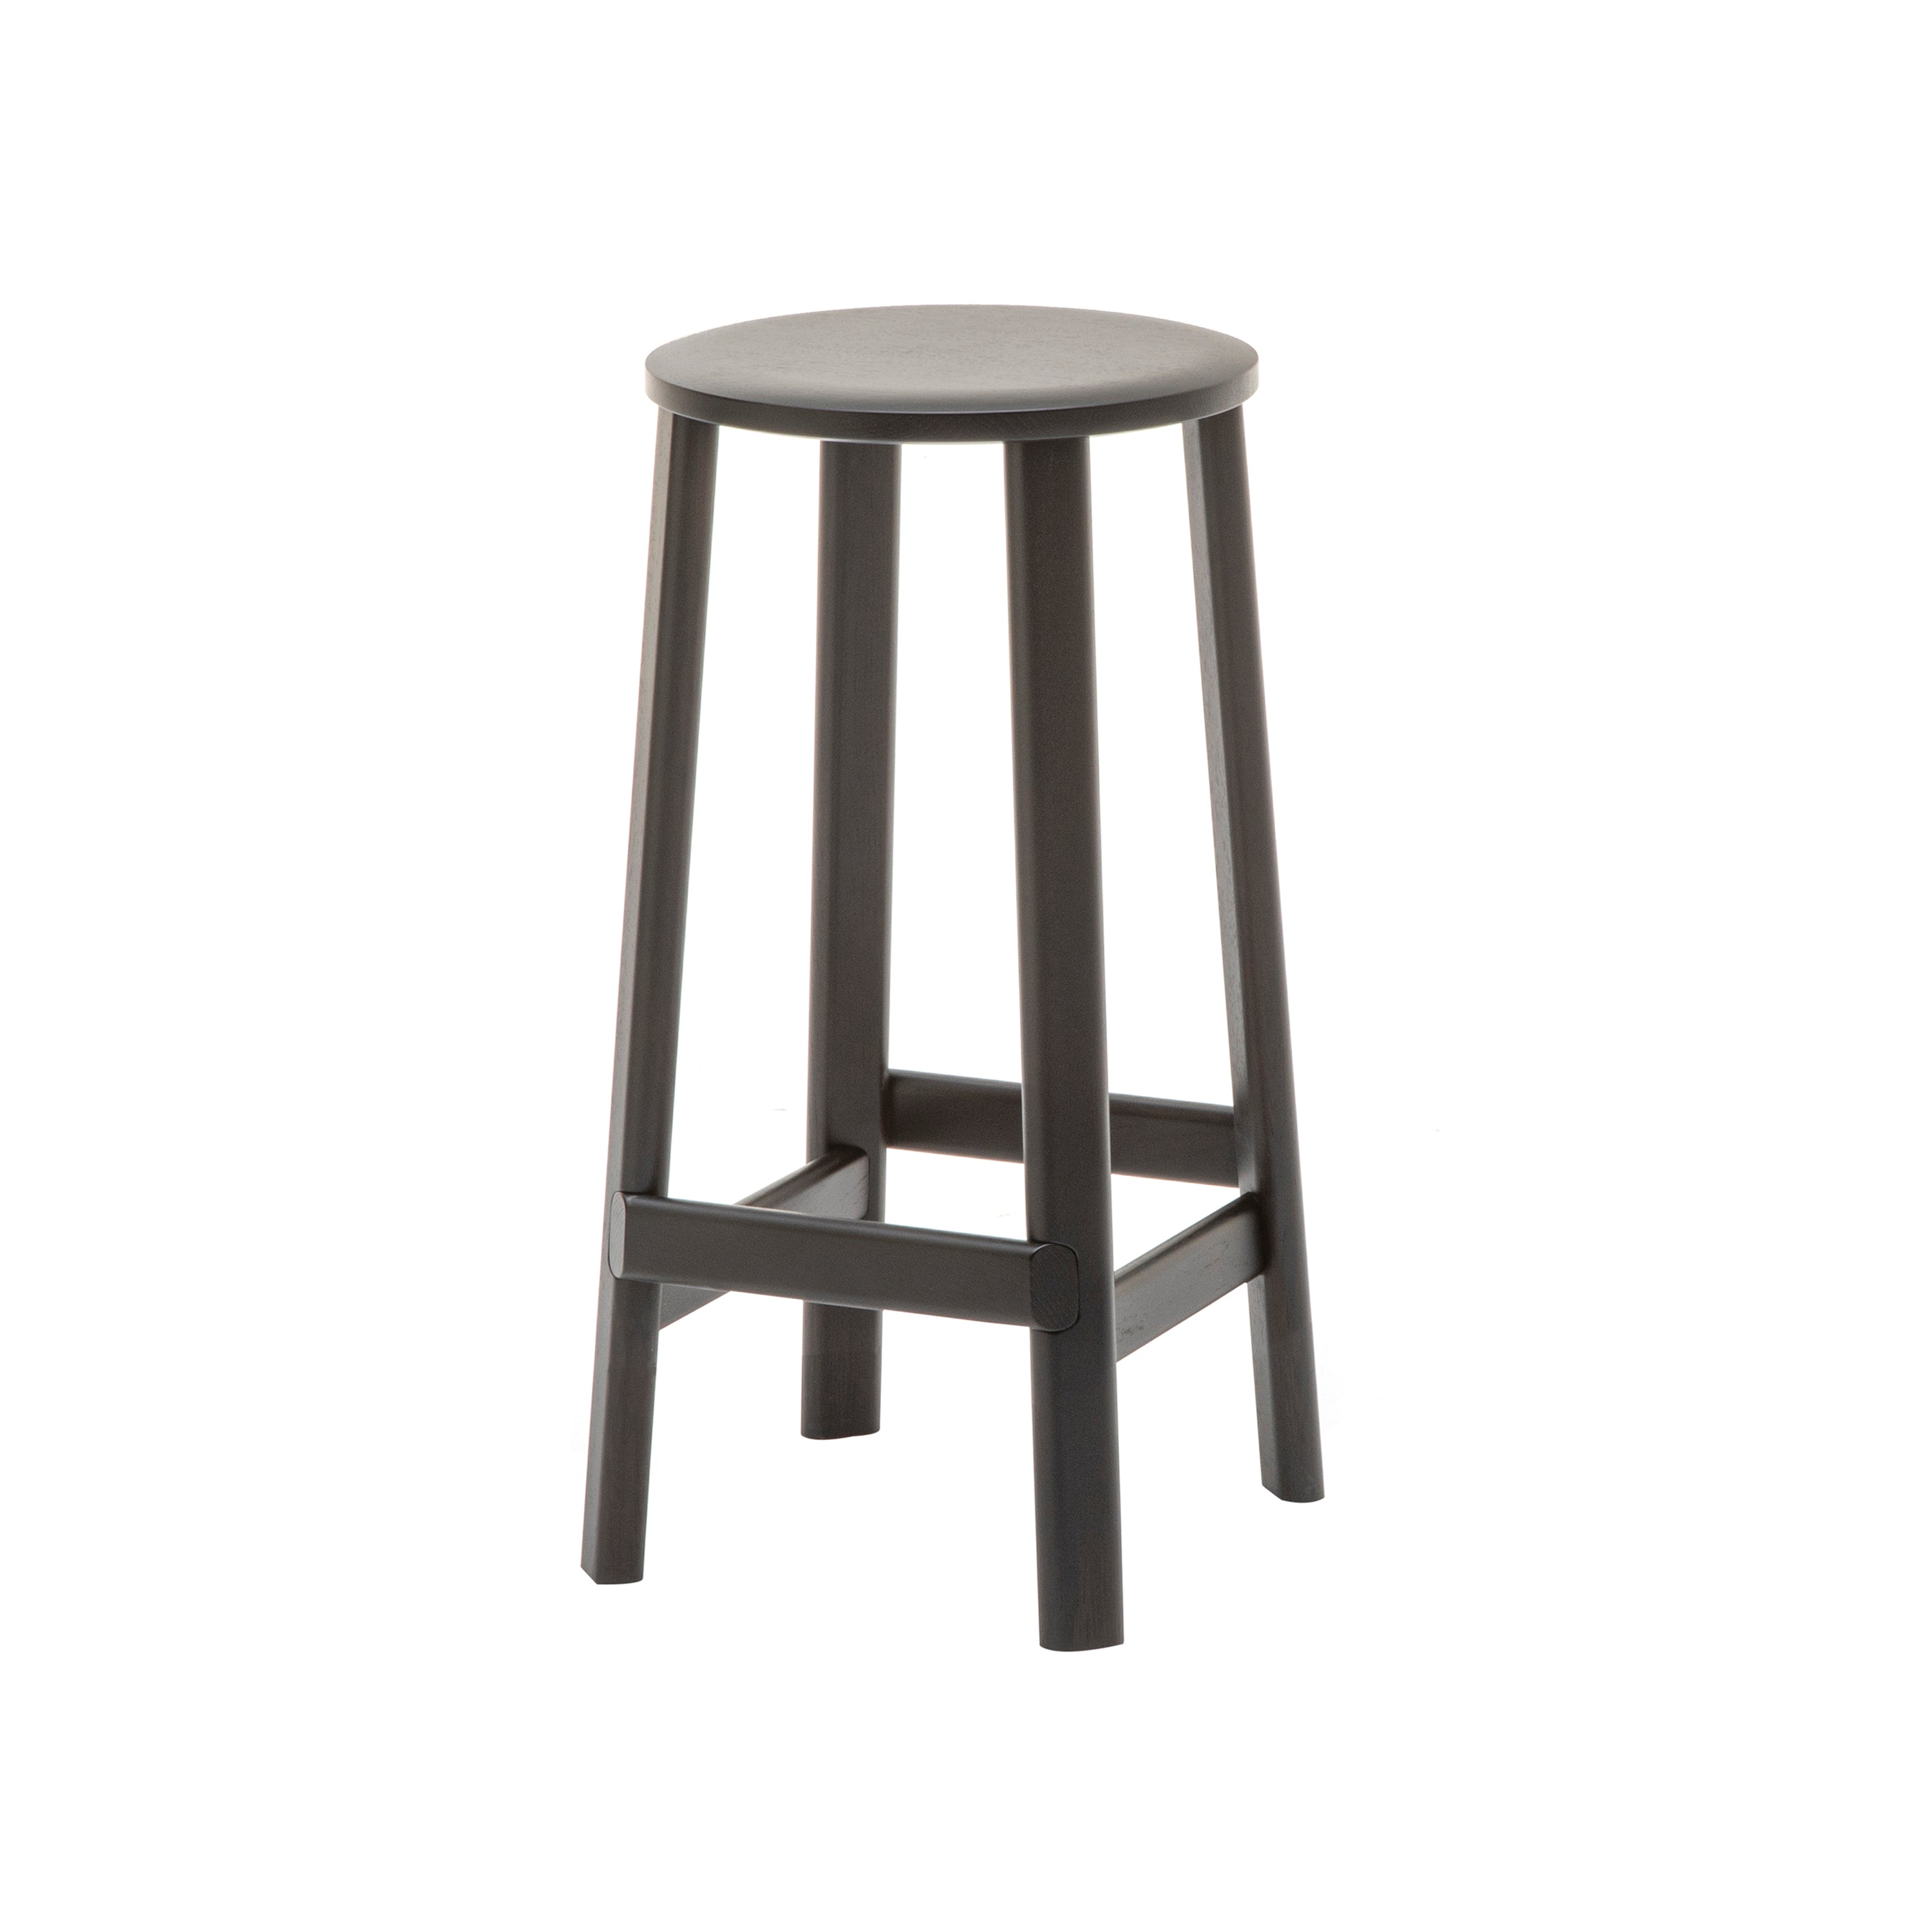 Archive Bar + Counter Stool: Counter + Black + Without Pad